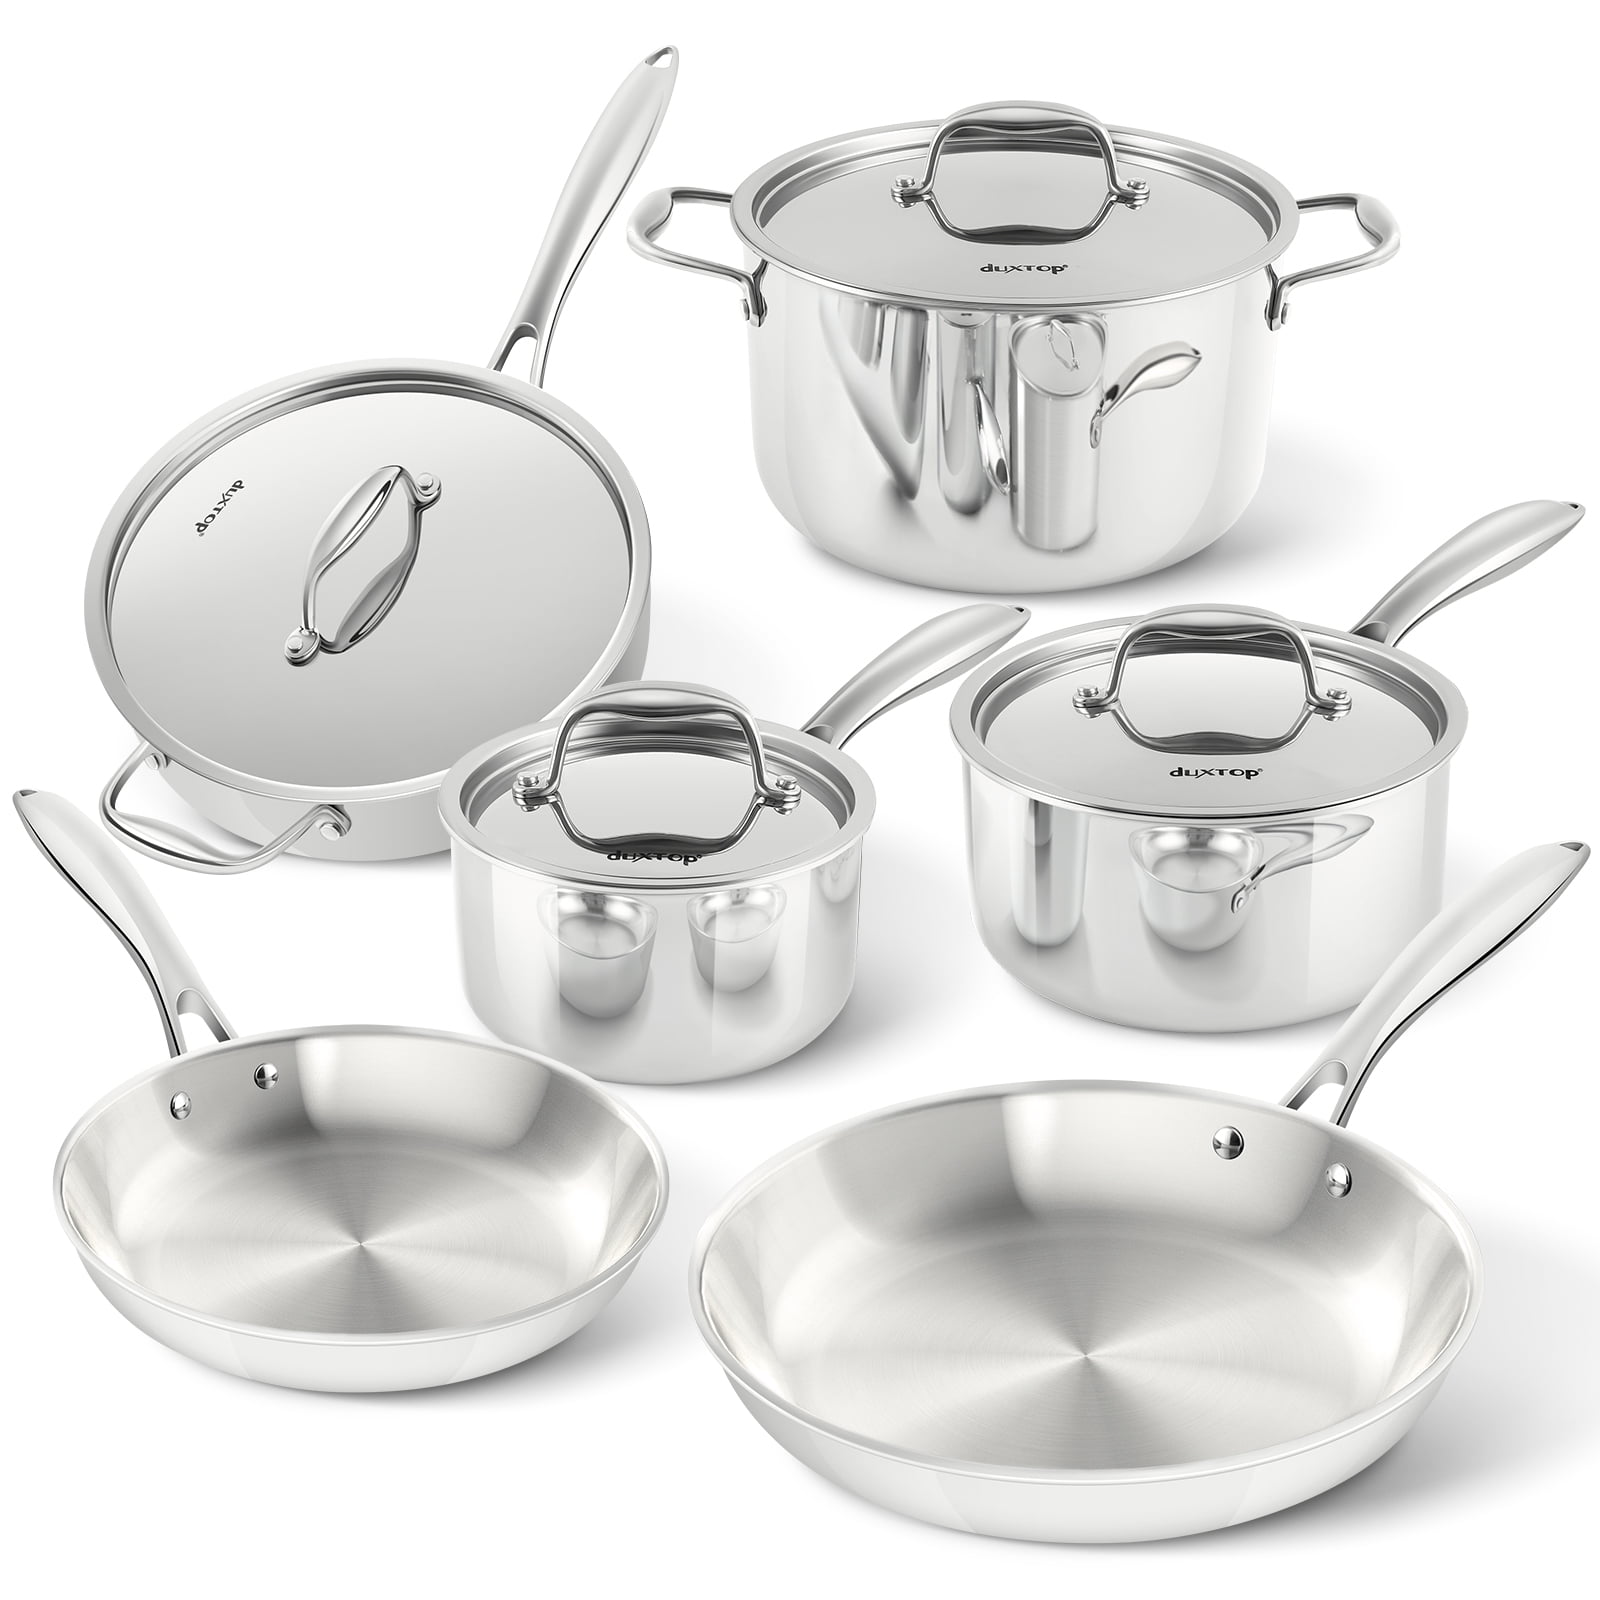 D3 - 10 Piece Tri-Ply Stainless Steel Cookware Set I All-Clad